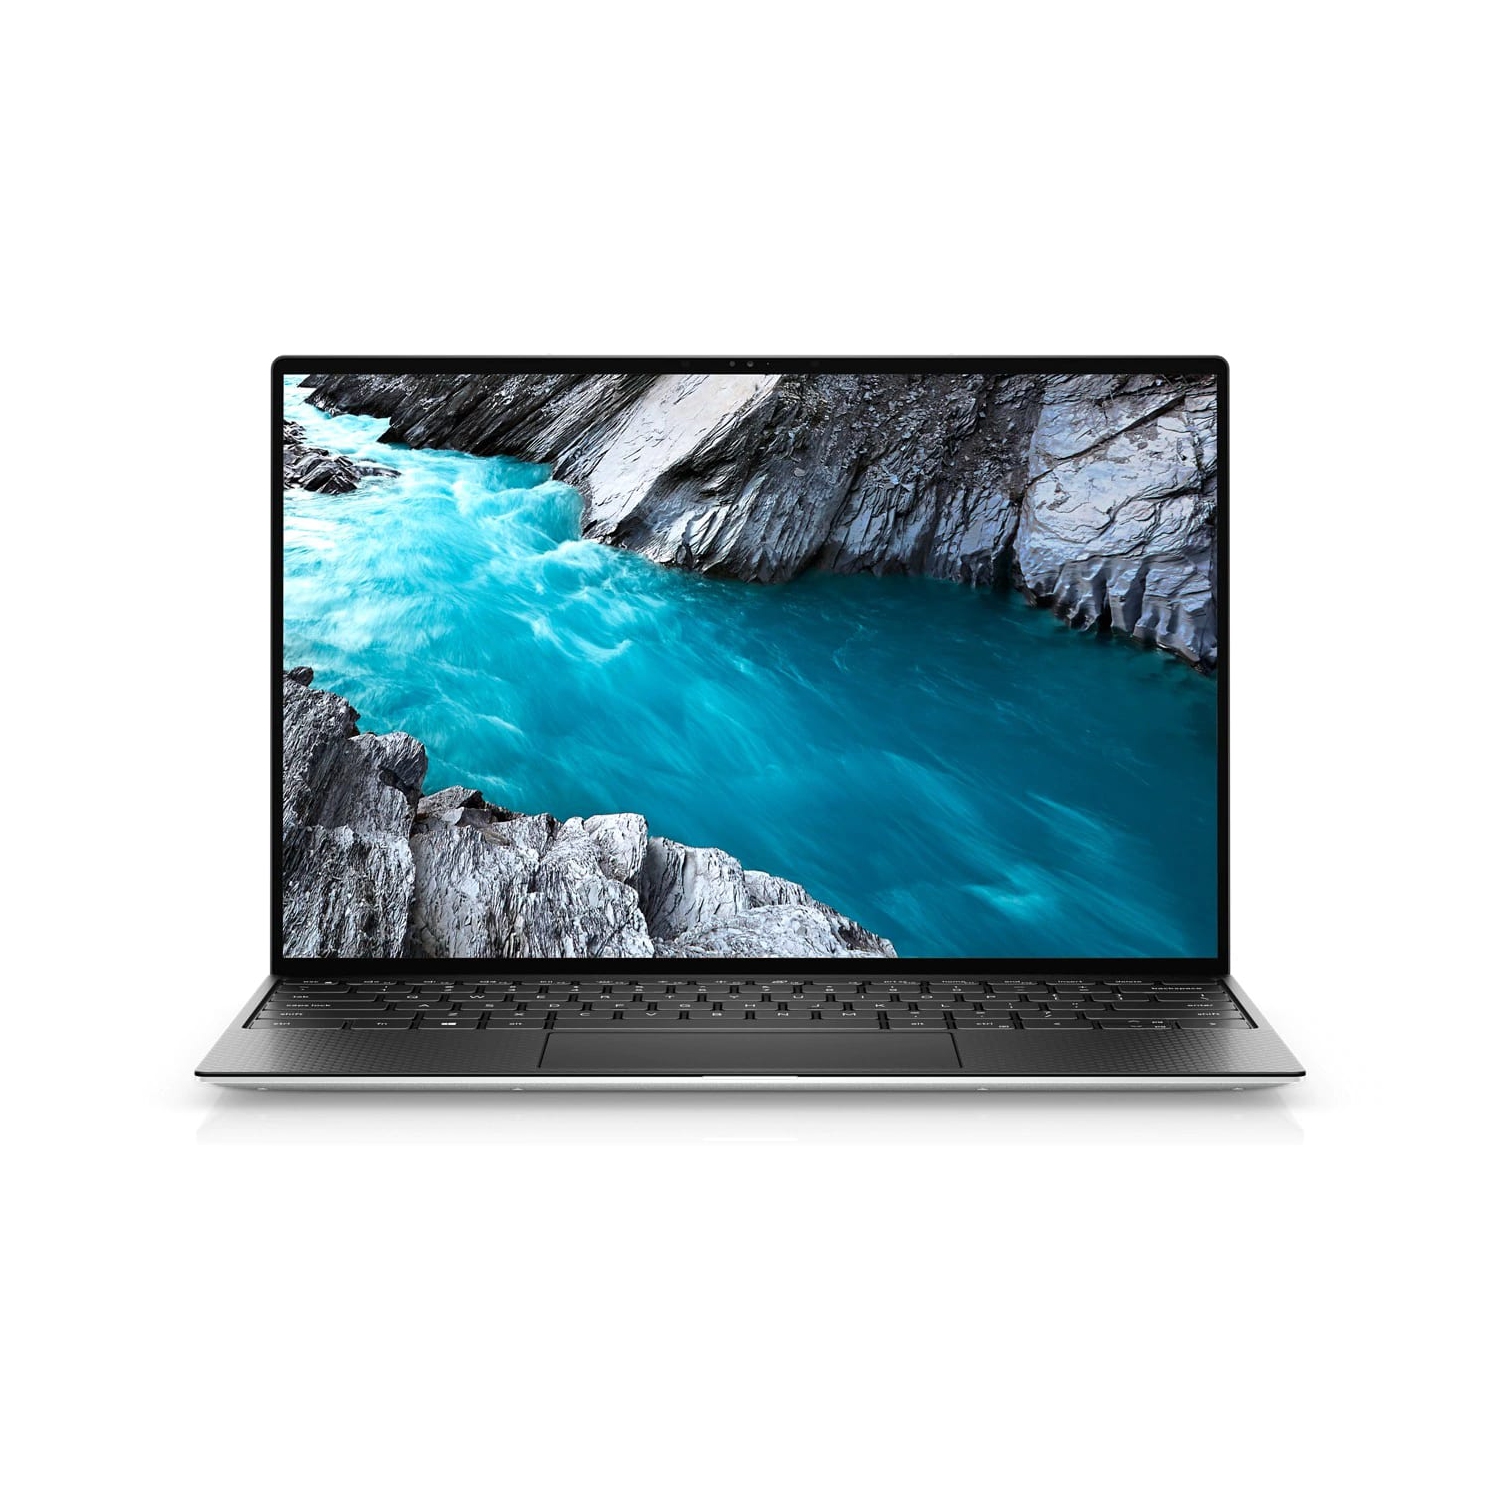 Dell XPS 13 9310 Laptop (2020) | 13.4" FHD+ Touch | Core i7 - 512GB SSD - 16GB RAM | 4 Cores @ 4.7 GHz - 11th Gen CPU Certified Refurbished